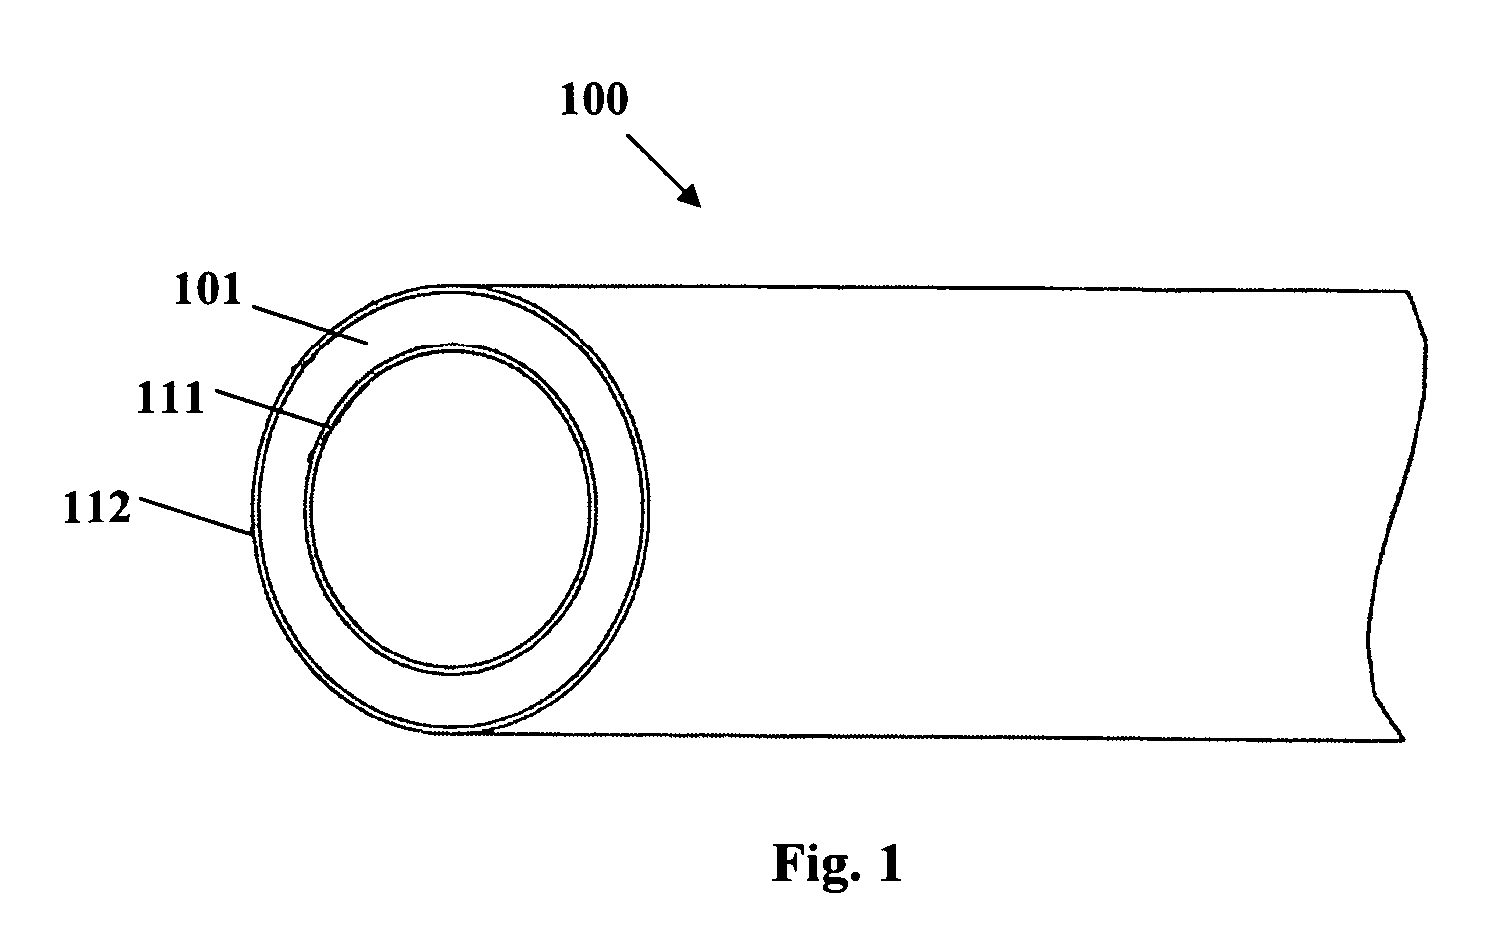 Implantable or insertable medical device resistant to microbial growth and biofilm formation